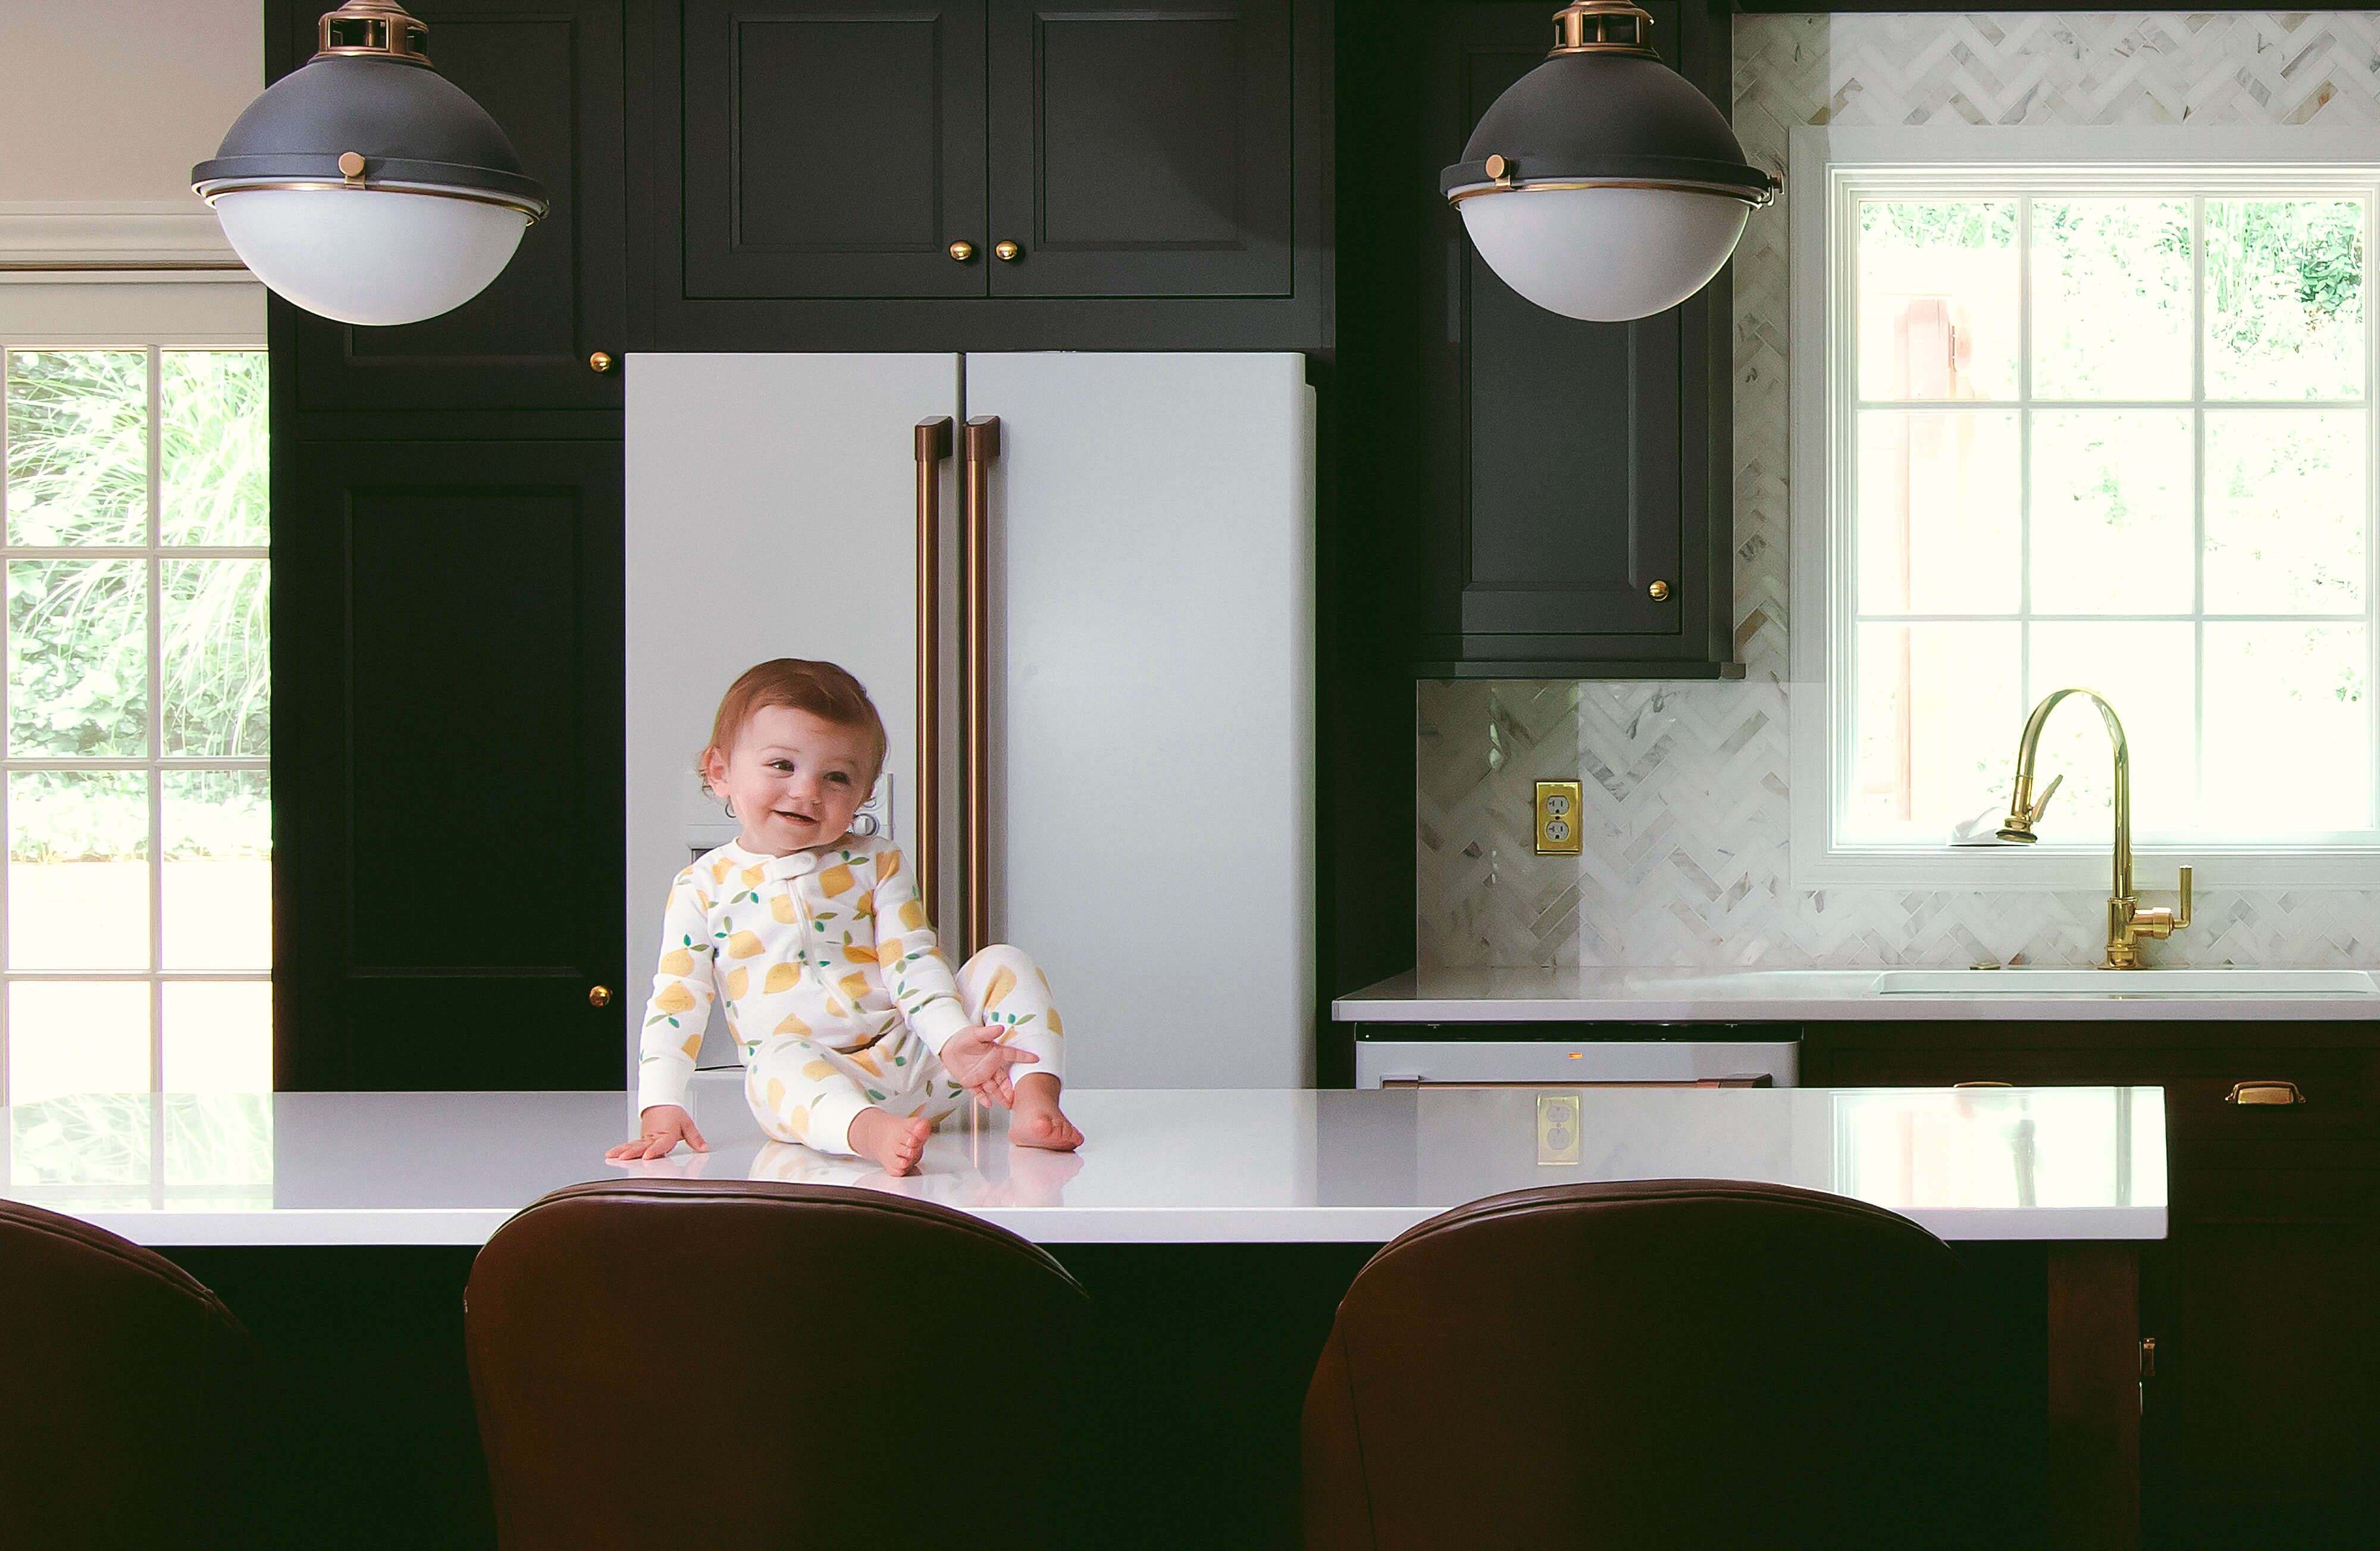 A black kitchen with white appliances with an adorable toddler happy to have a new kitchen!